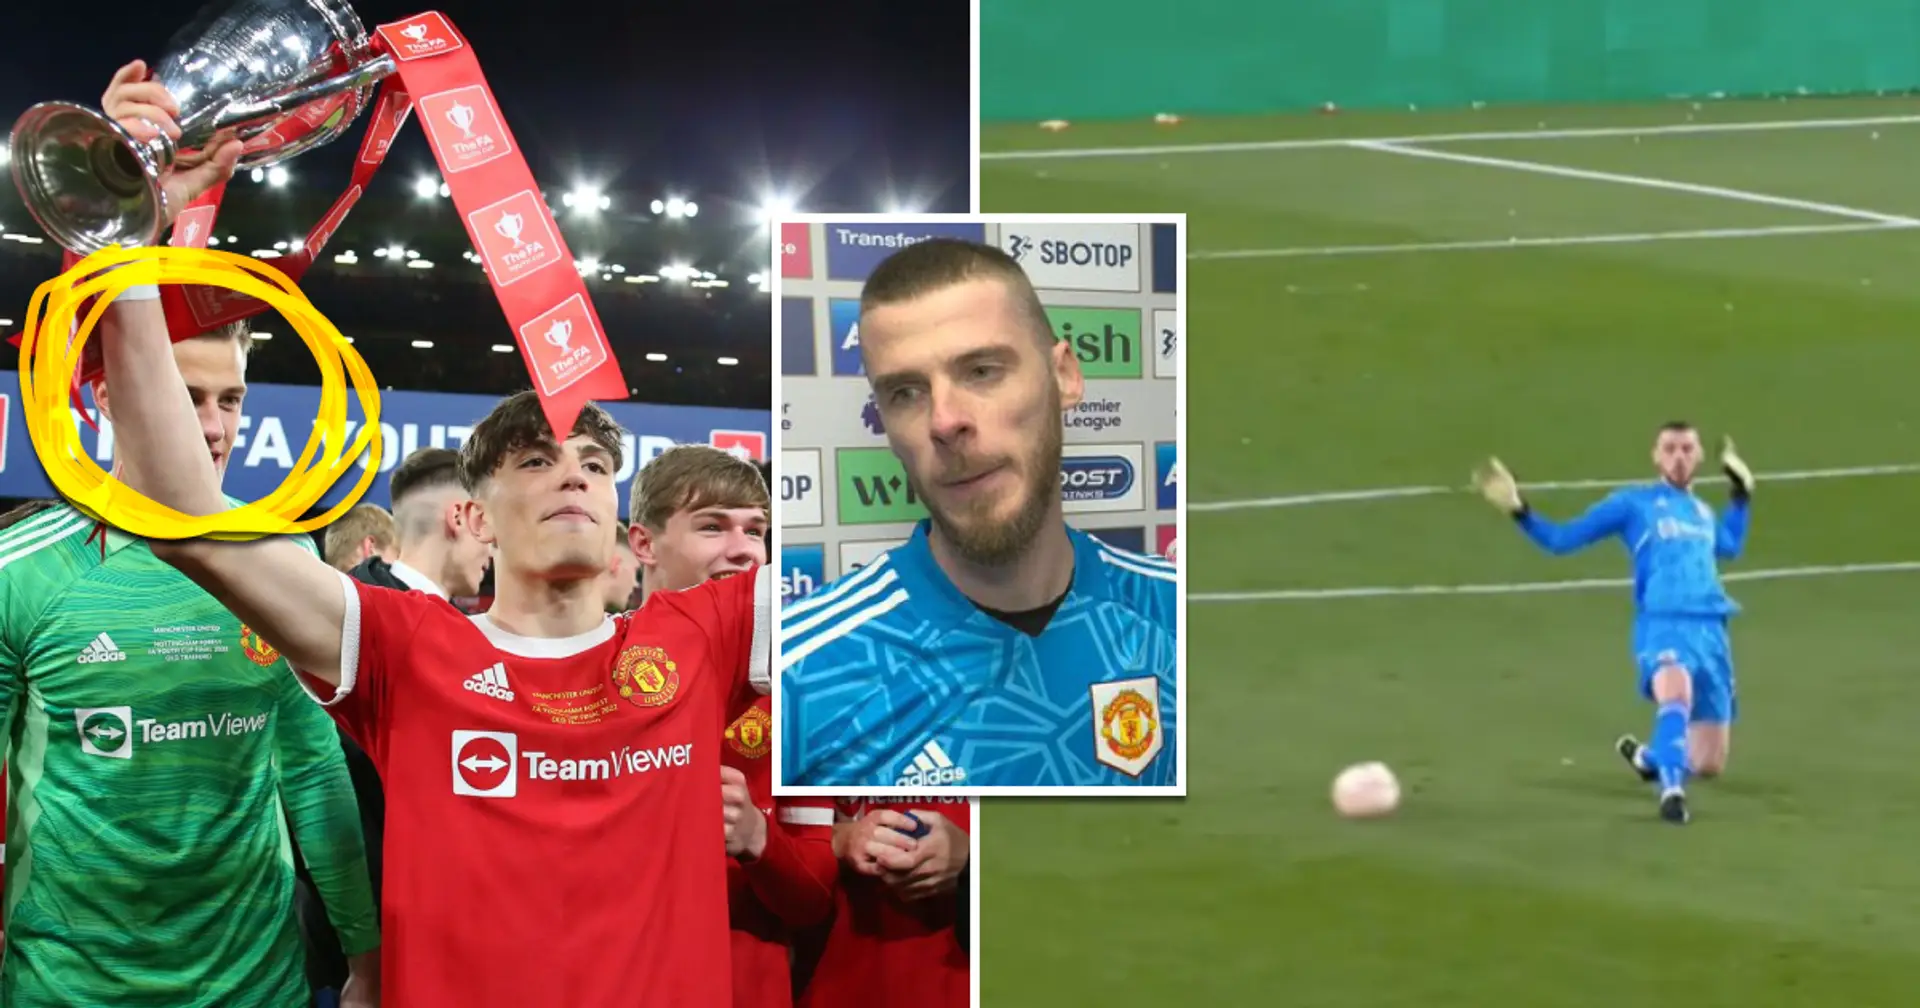 Man United fans want 6 ft 5 goalkeeper to replace De Gea in next game — not Butland